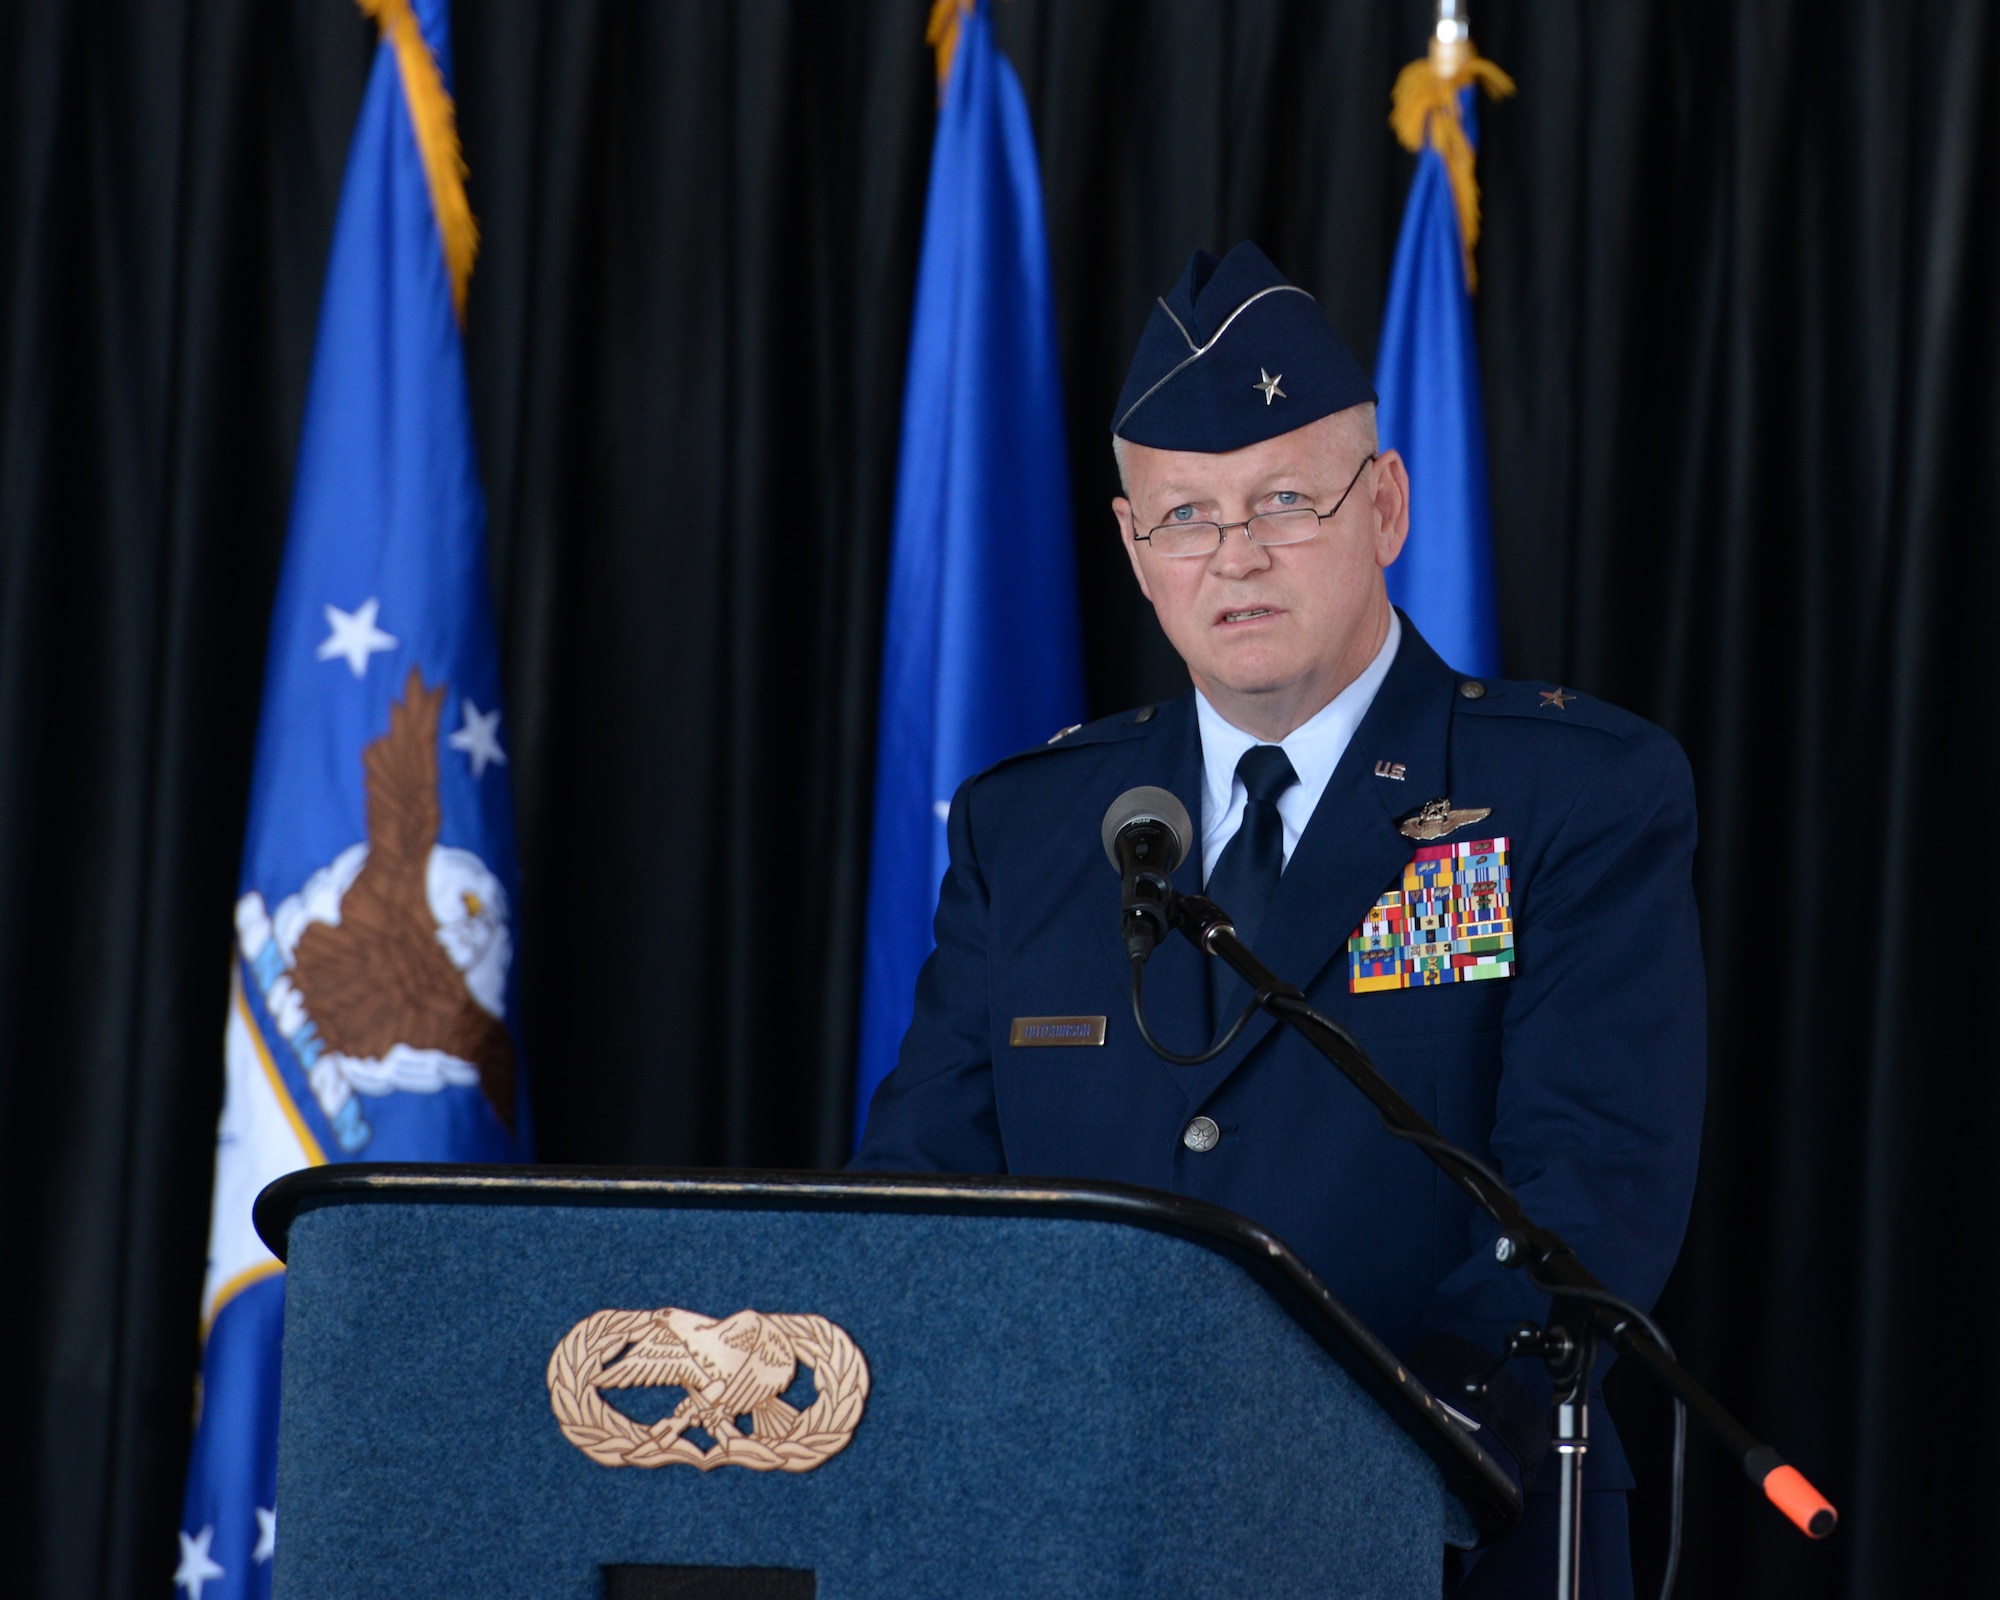 Brig. Gen. Paul Hutchinson, commander New Hampshire Air National Guard speaks to the audience during a change of command ceremony at Pease Air National Base, N.H., on Aug. 9, 2015. Hutchinson assumed command of the NHANG from Brig. Gen. Carolyn J. Protzmann. (U.S. Air National Guard photo by Staff Sgt. Curtis J. Lenz)